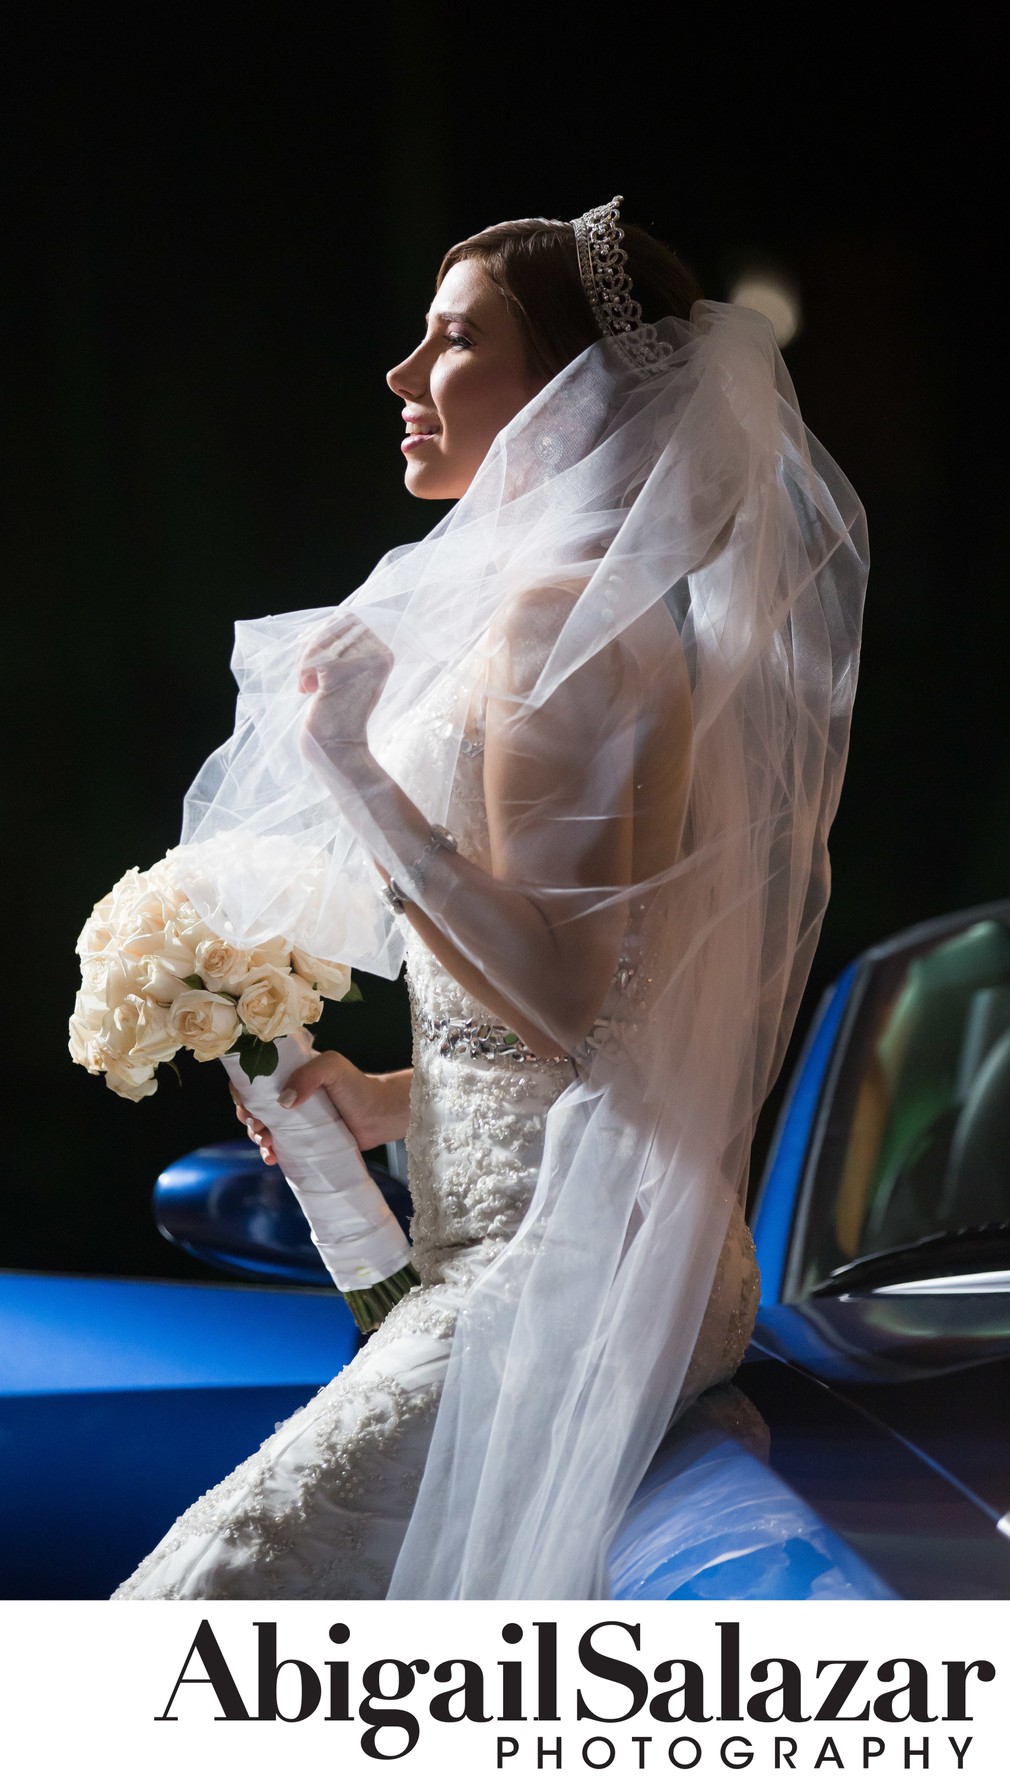 Sophisticated bride and blue wedding car